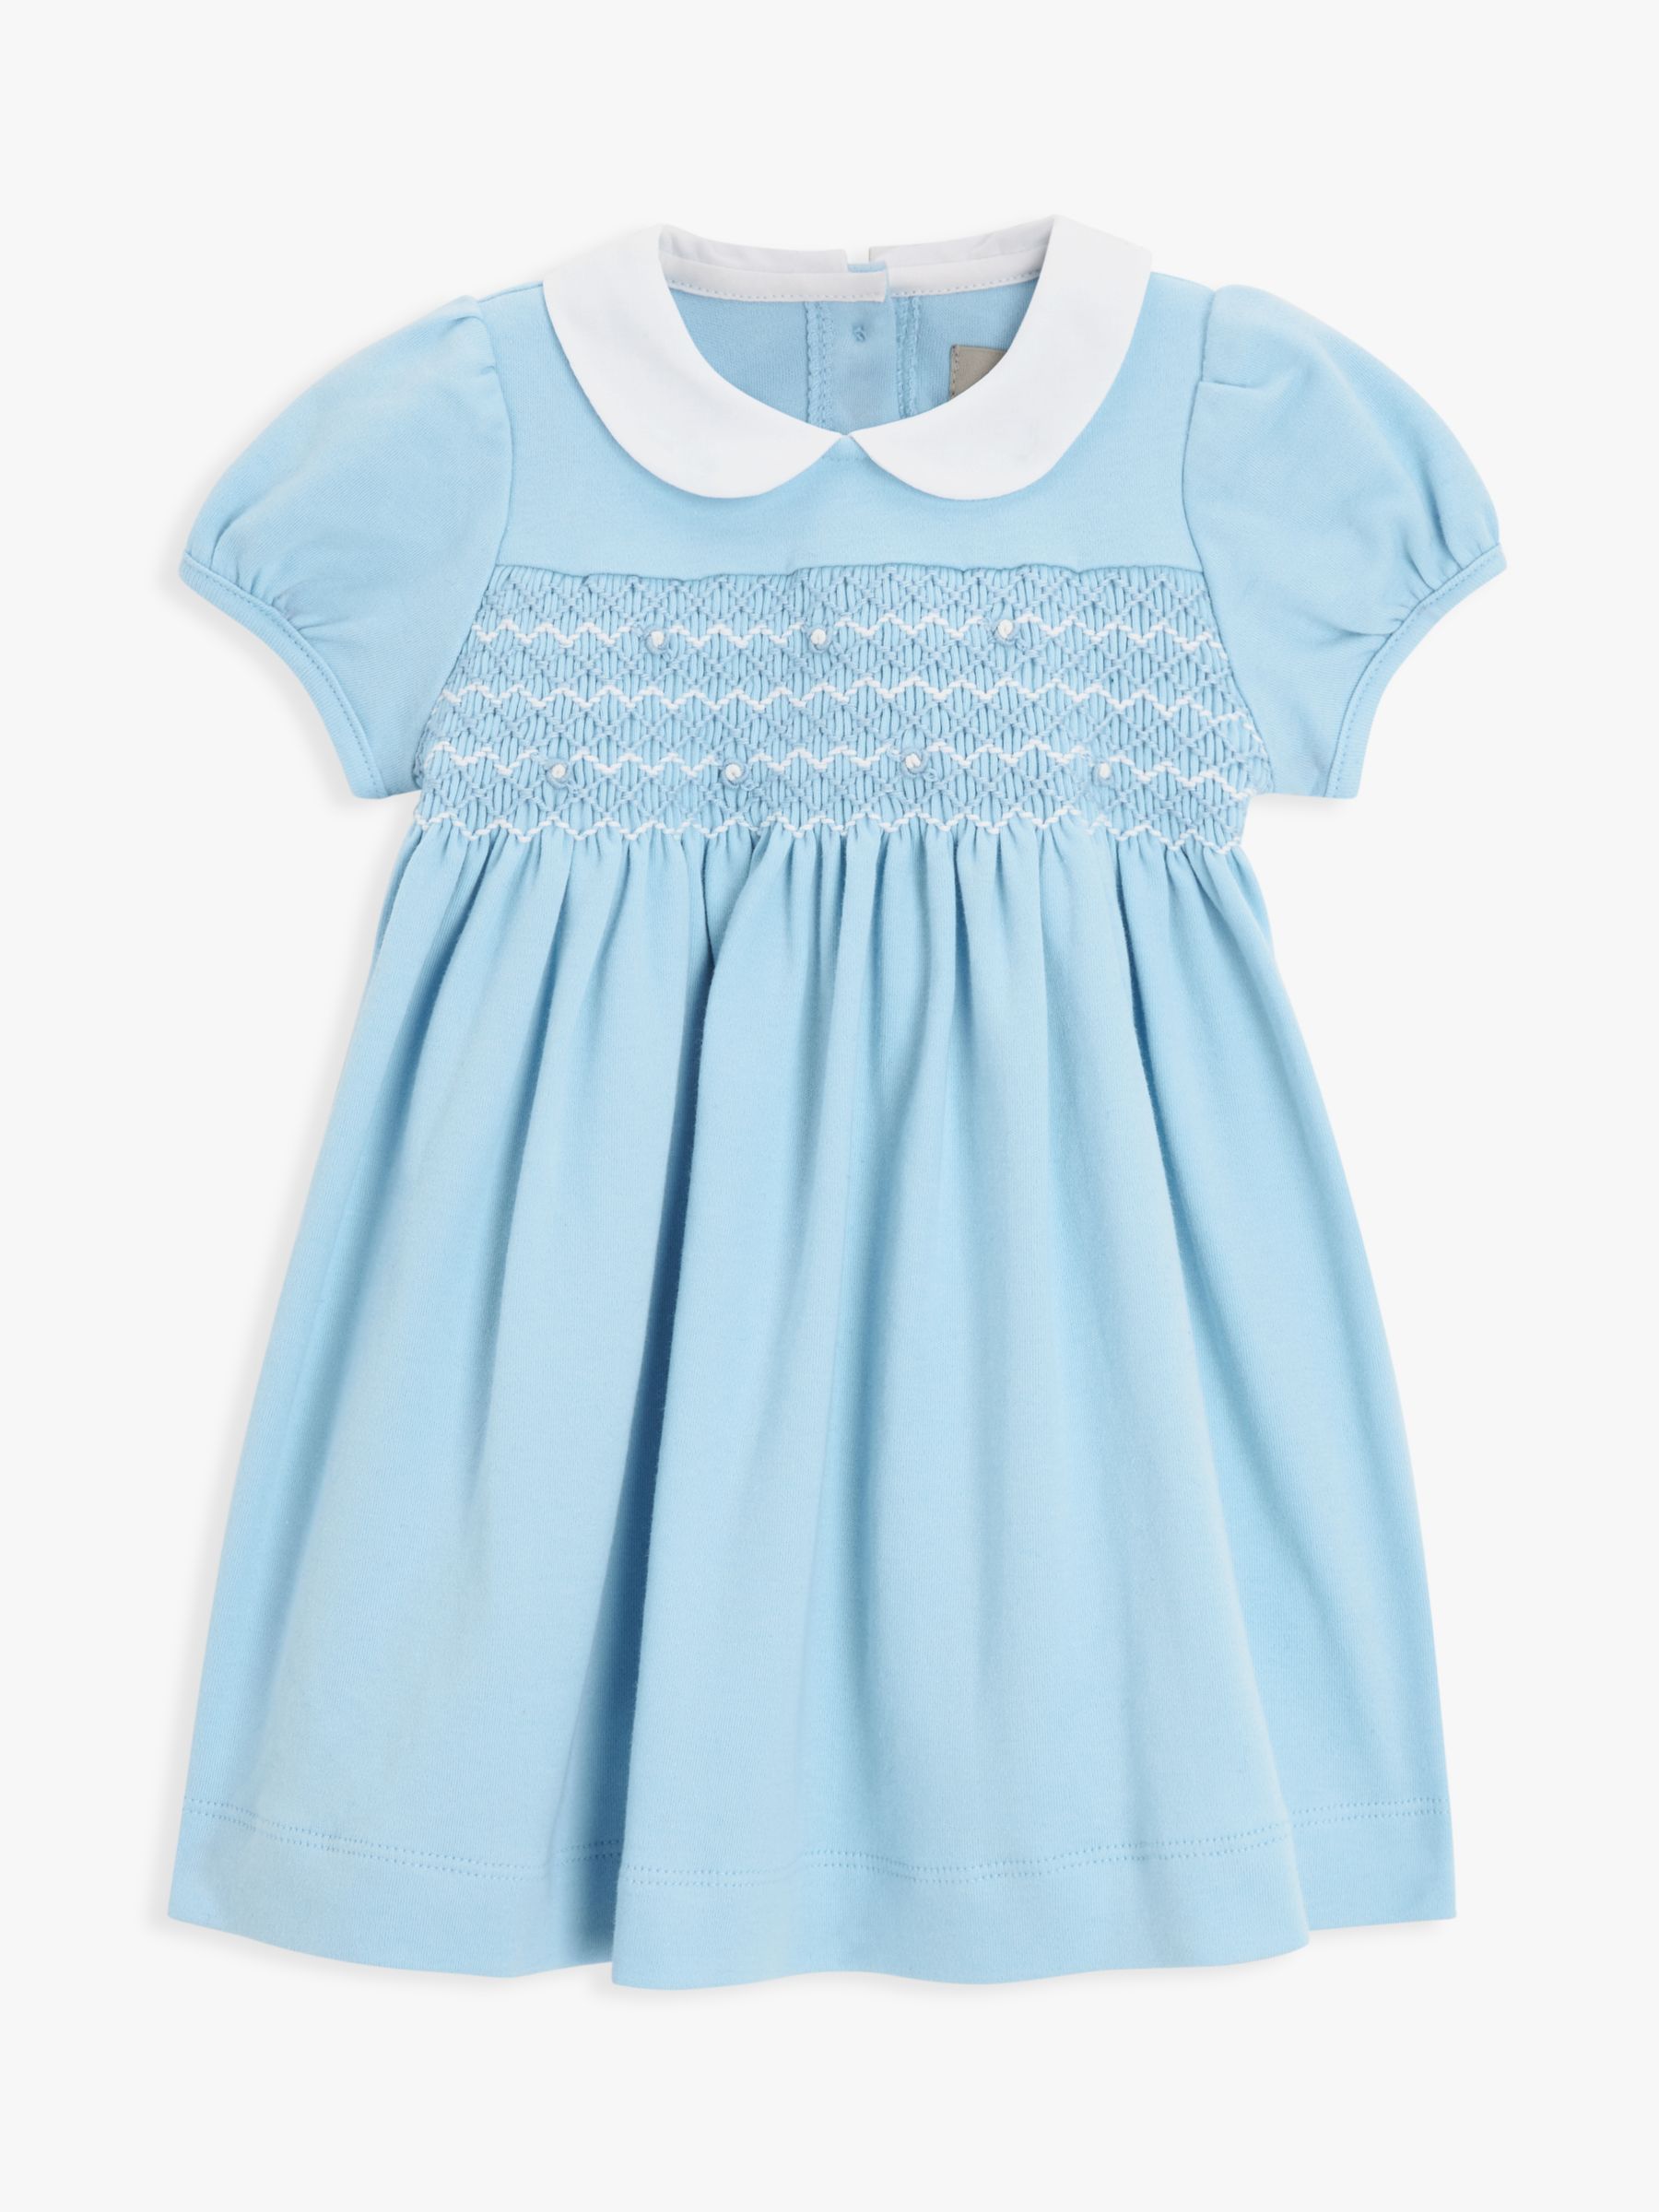 John Lewis Heirloom Collection Baby Pima Cotton Smocked Dress, Blue